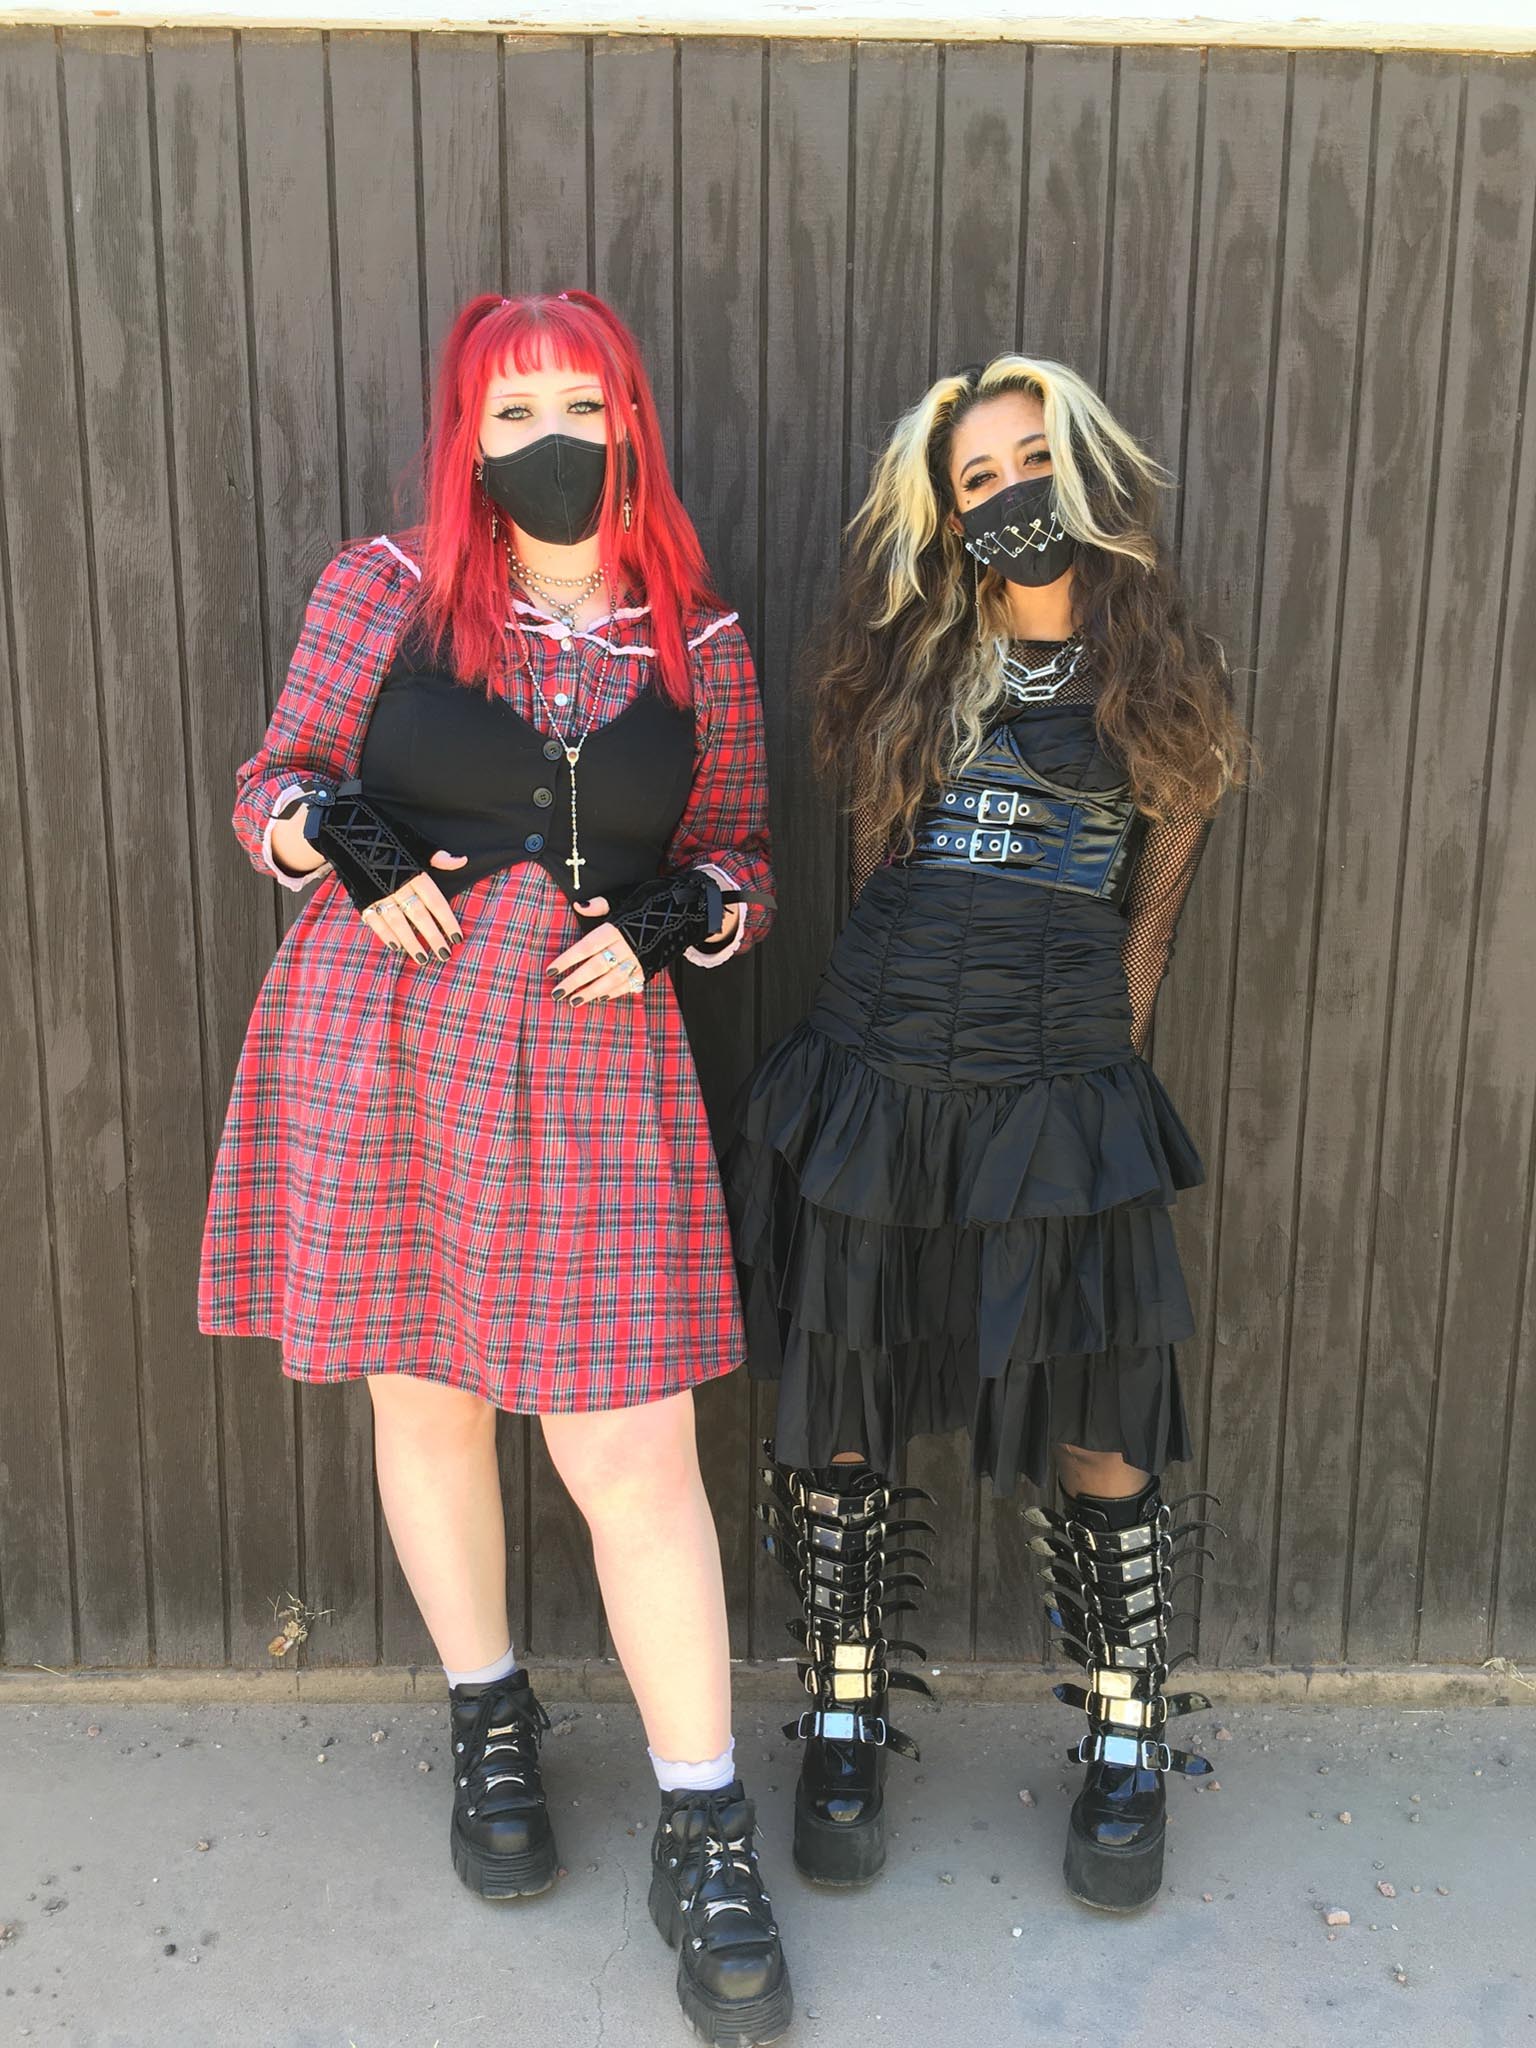 Two people wearing punk clothing, one in a red plaid dress and black vest, the other in a black dress with leather corset and silver-buckled boots.